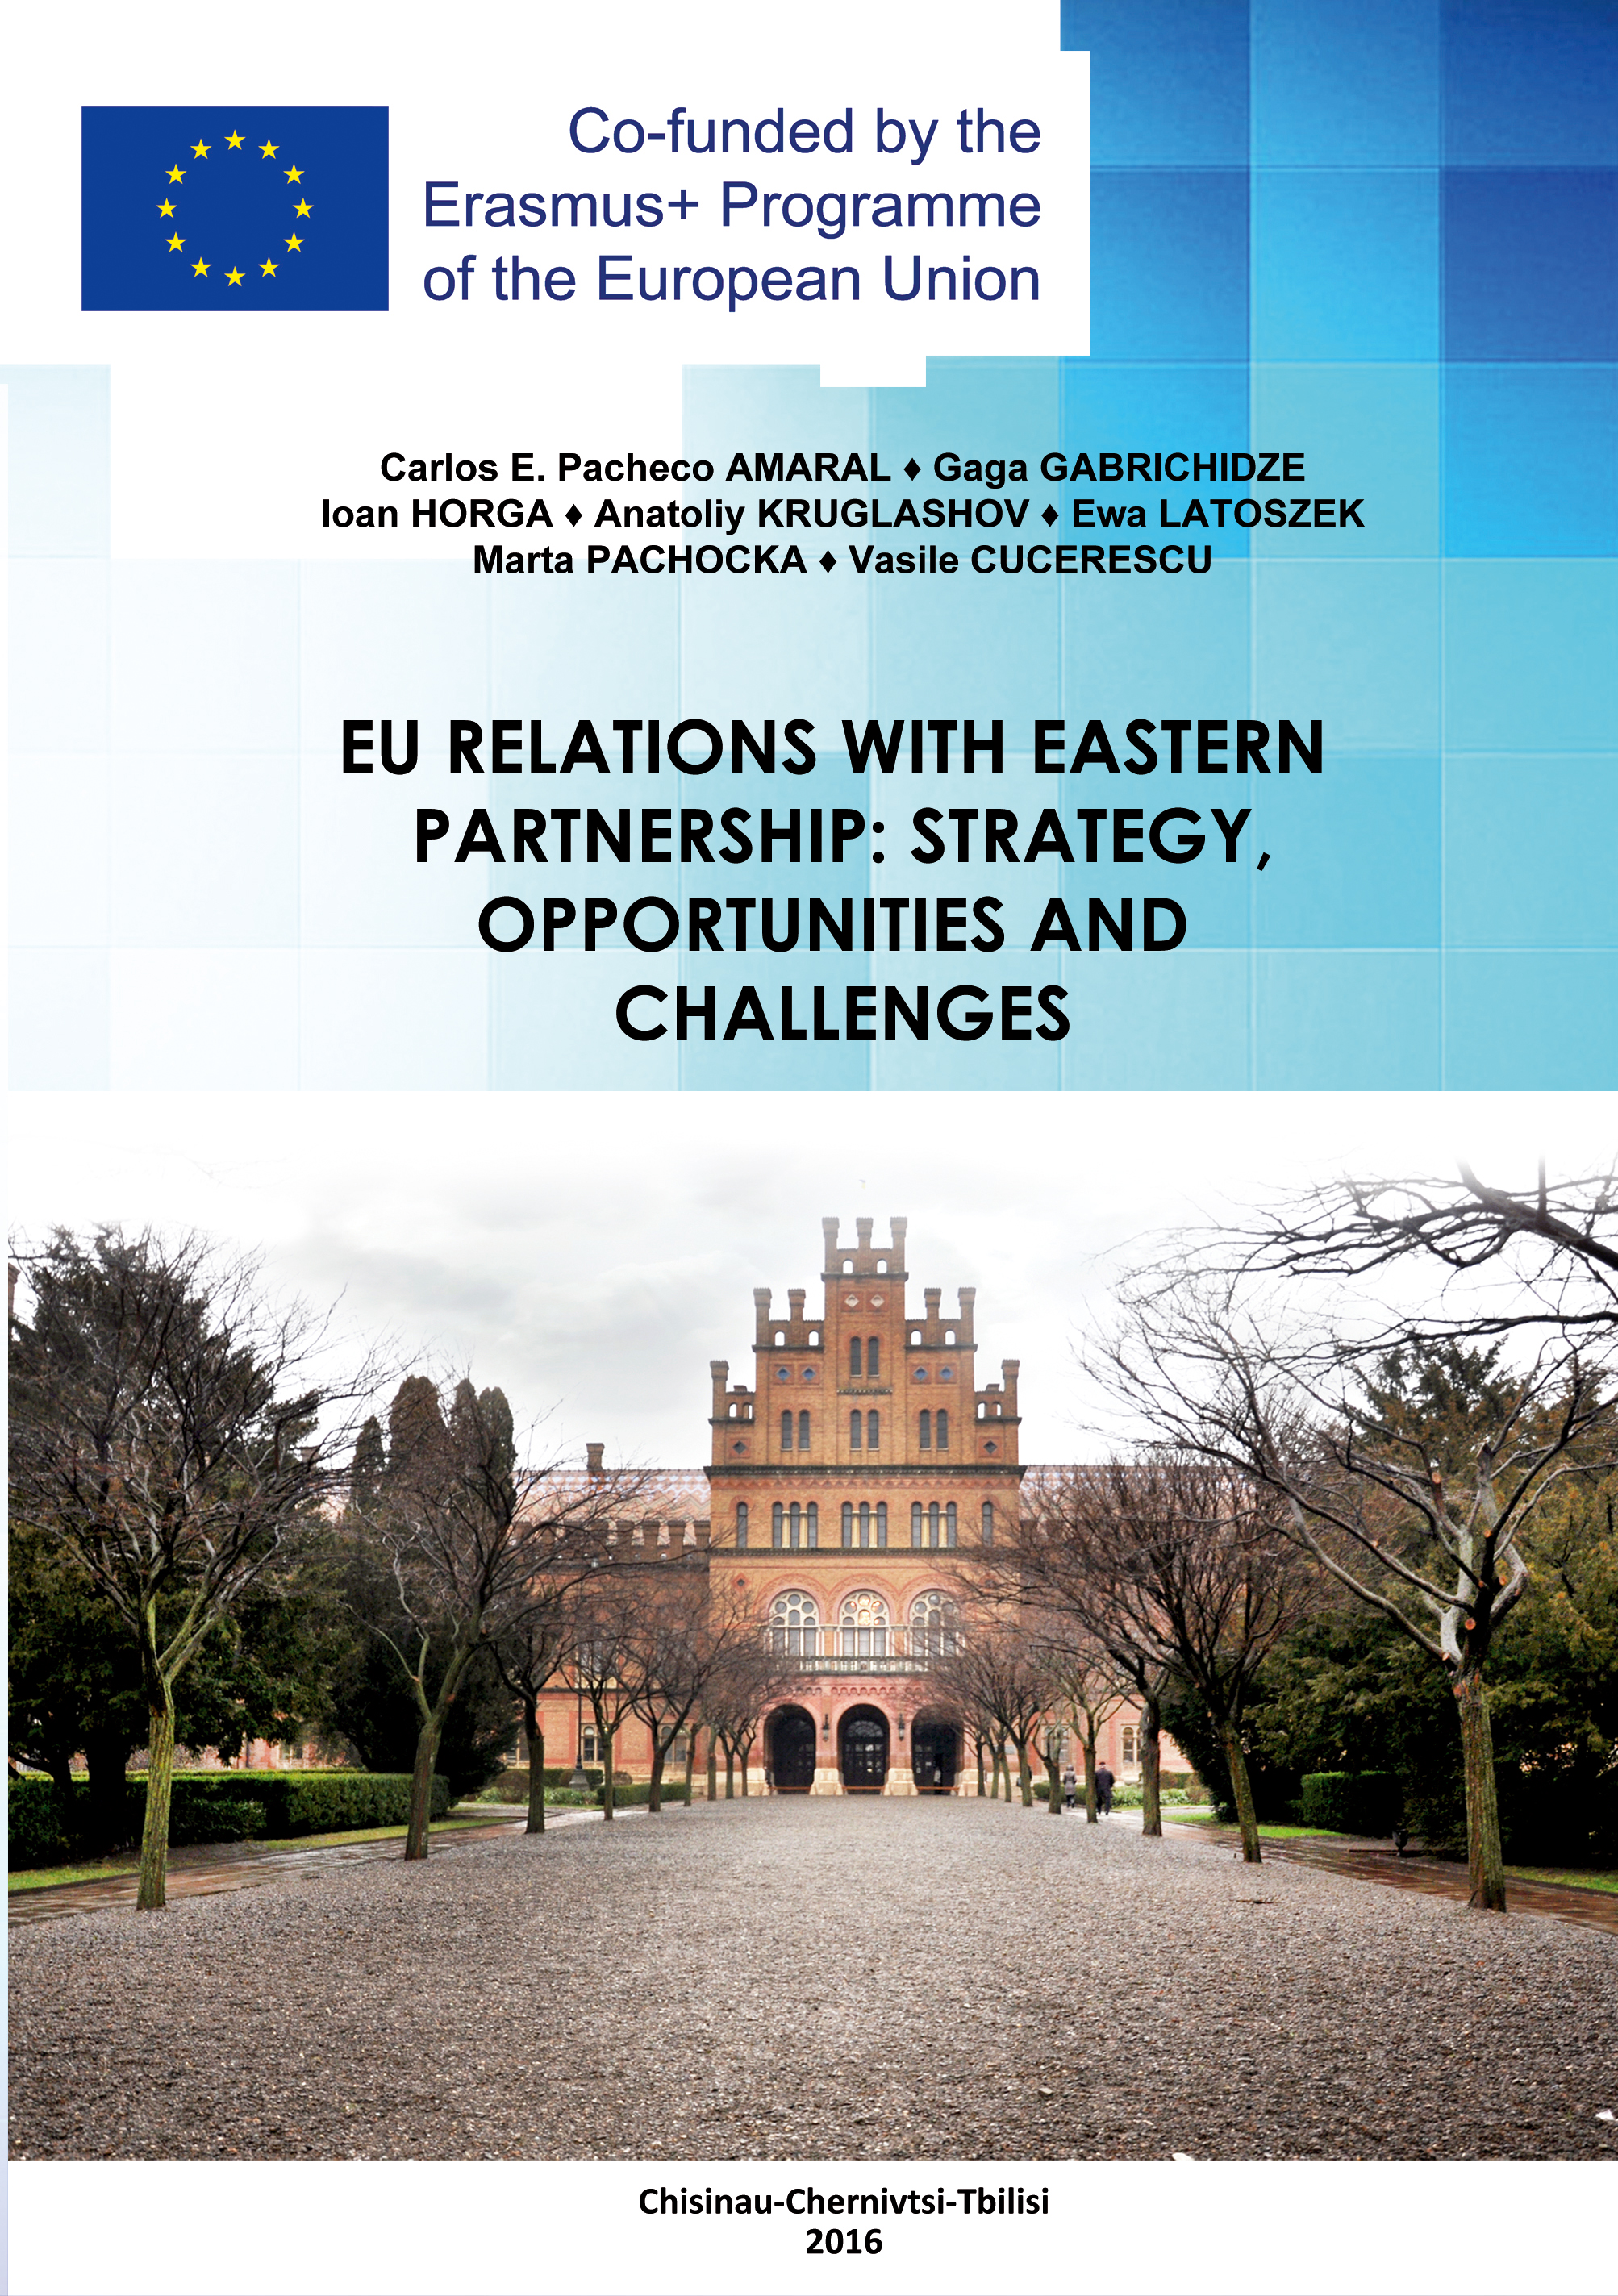 The EU and the Eastern partnership: scientific network and macroeconomic effects via bilateral relations Cover Image